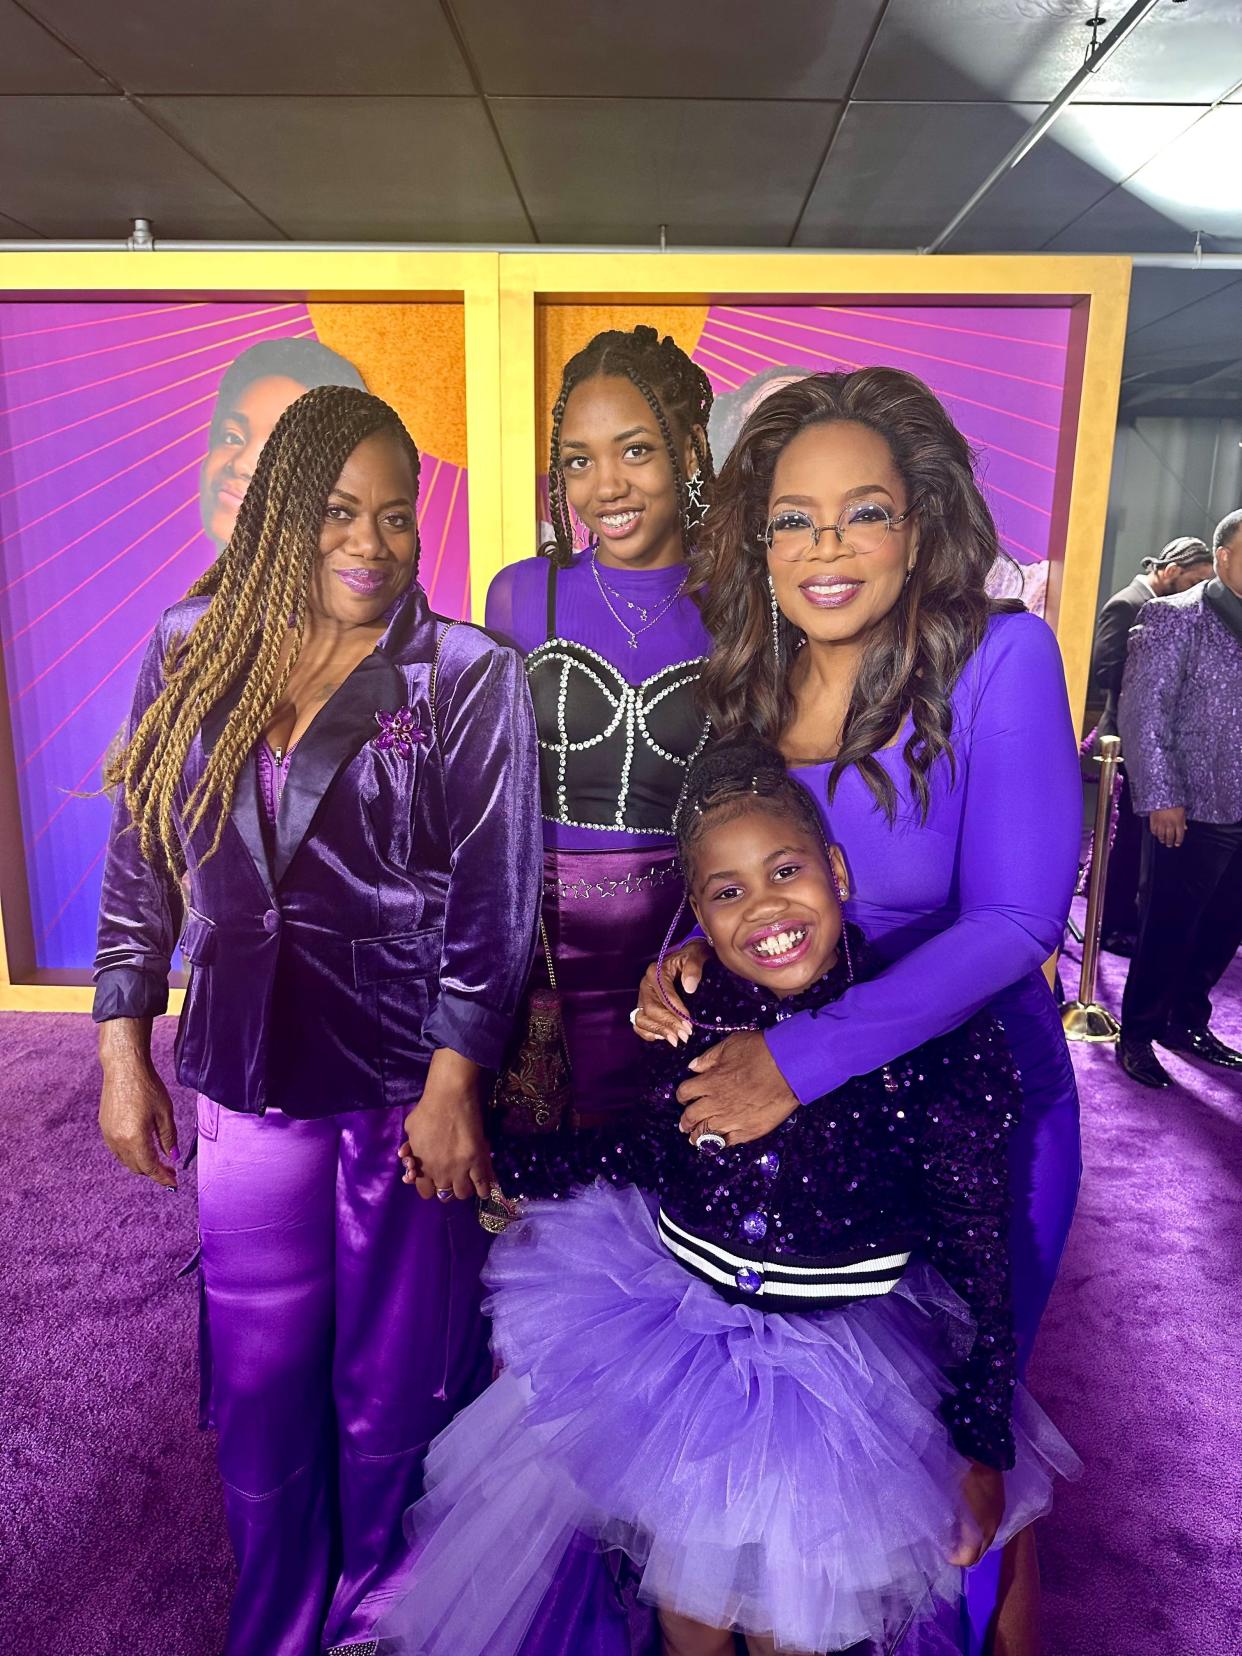 From left: Detroit's Kenya White and her daughters, A'Blesyn Davis and Robin (Rosie) McKee with Oprah Winfrey at the Los Angeles premiere of "The Color Purple" on Dec. 6.